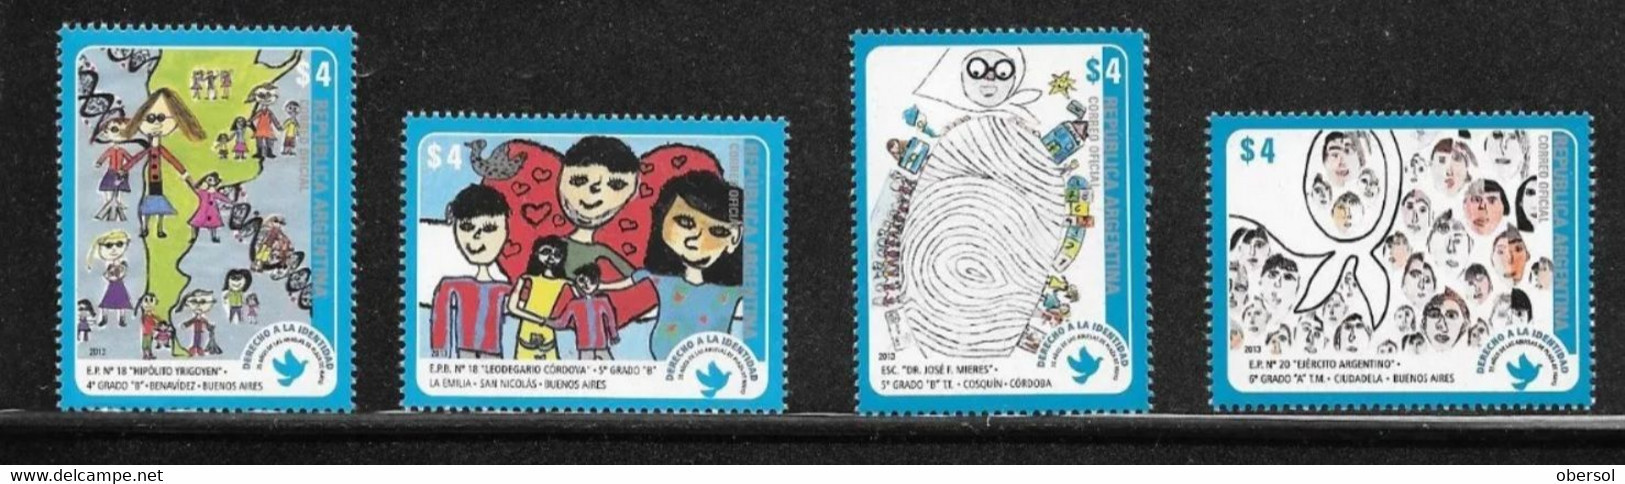 Argentina 2013 Identity Rights Kinder Drawings Complete Set MNH - Unused Stamps